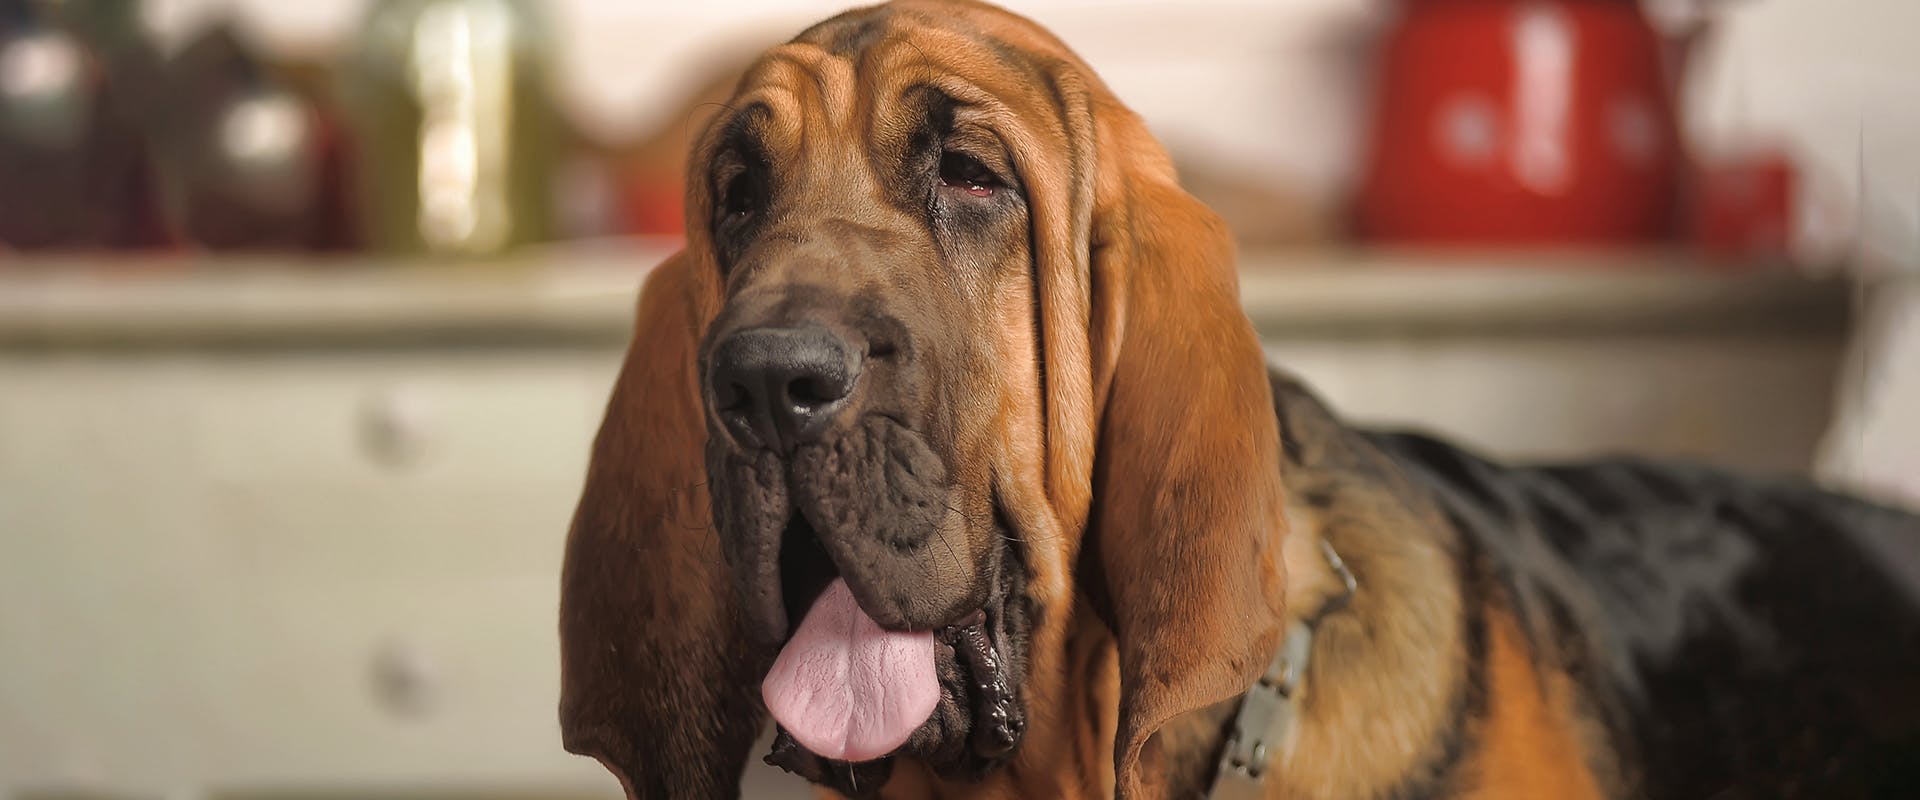 A Bloodhound dog with long floppy ears